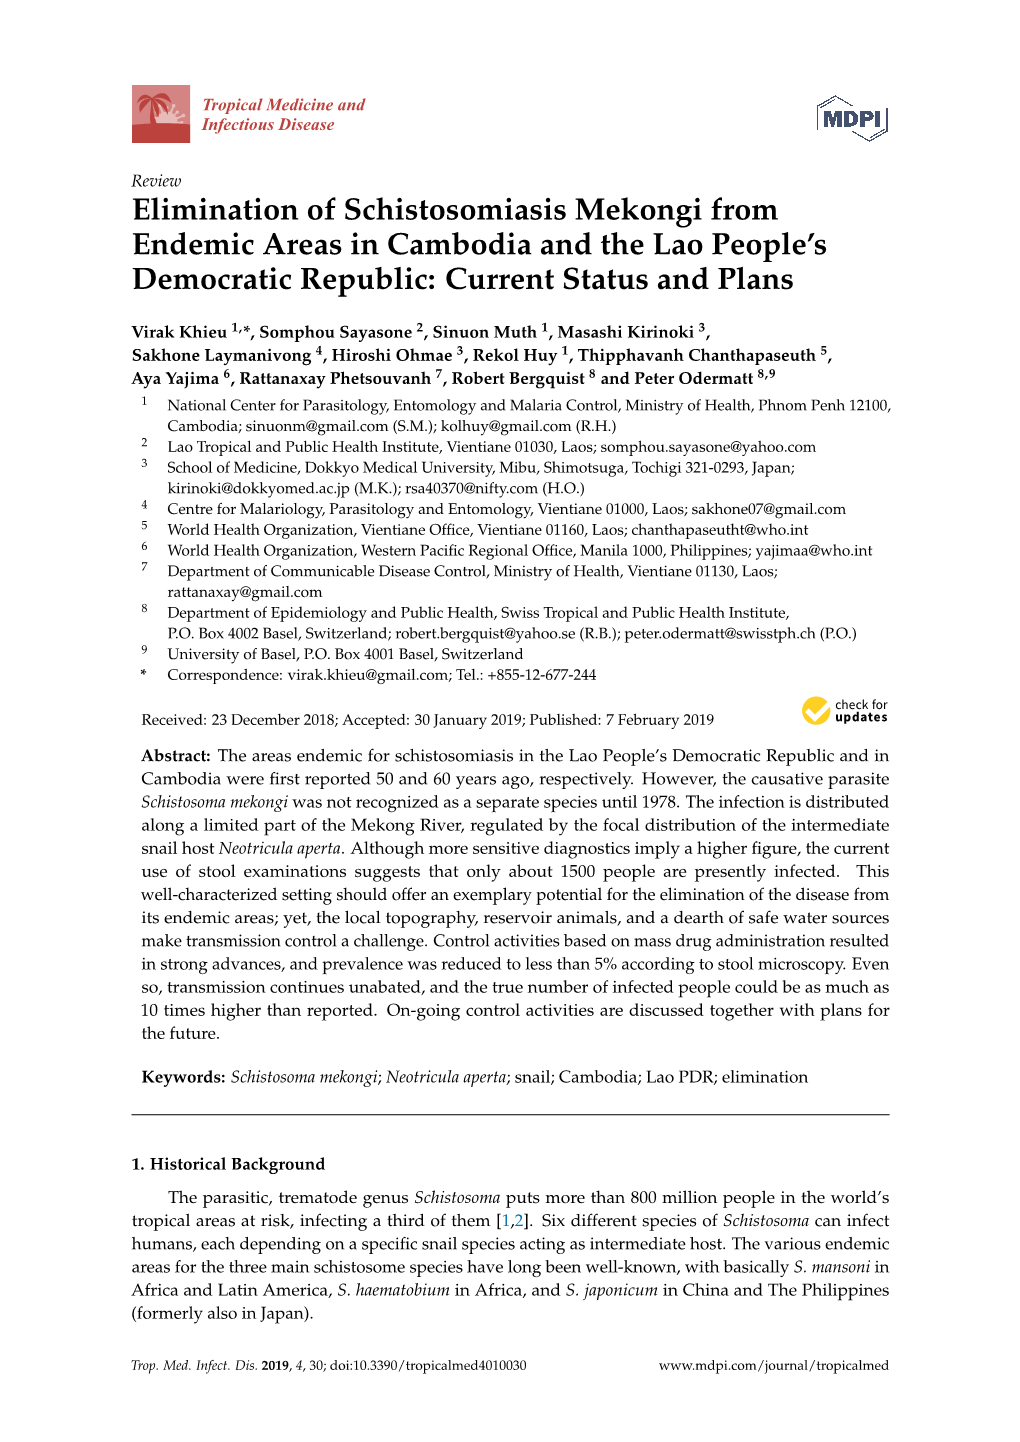 Elimination of Schistosomiasis Mekongi from Endemic Areas in Cambodia and the Lao People’S Democratic Republic: Current Status and Plans